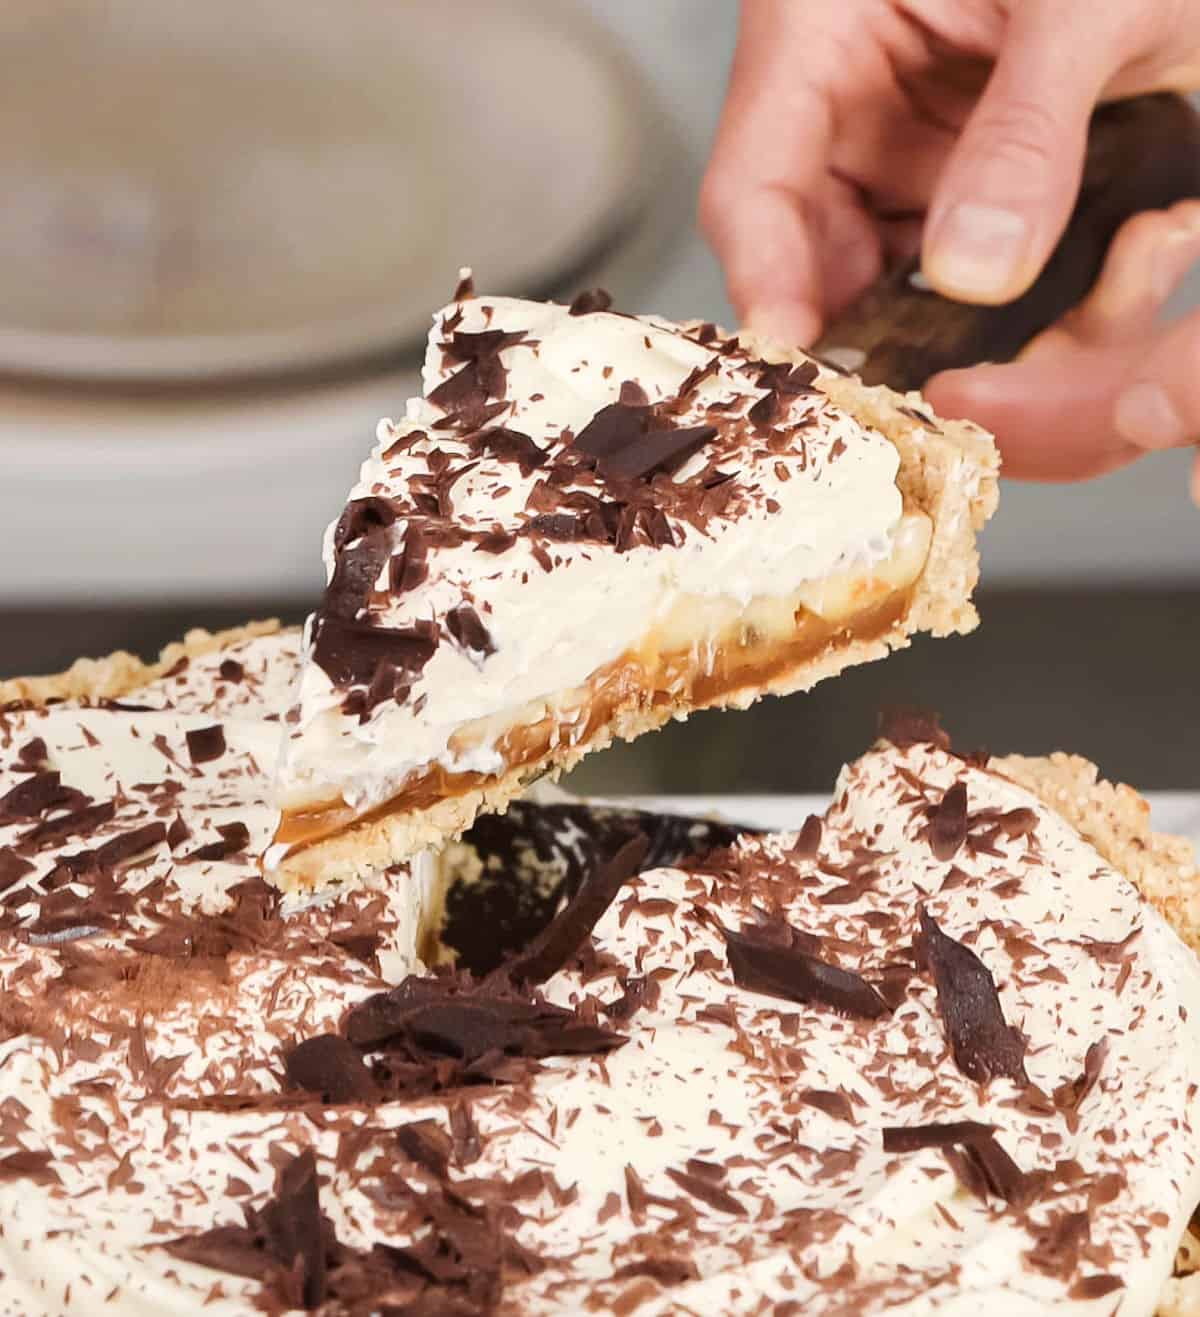 Lifting slice of banoffee pie from whole pie with cake server